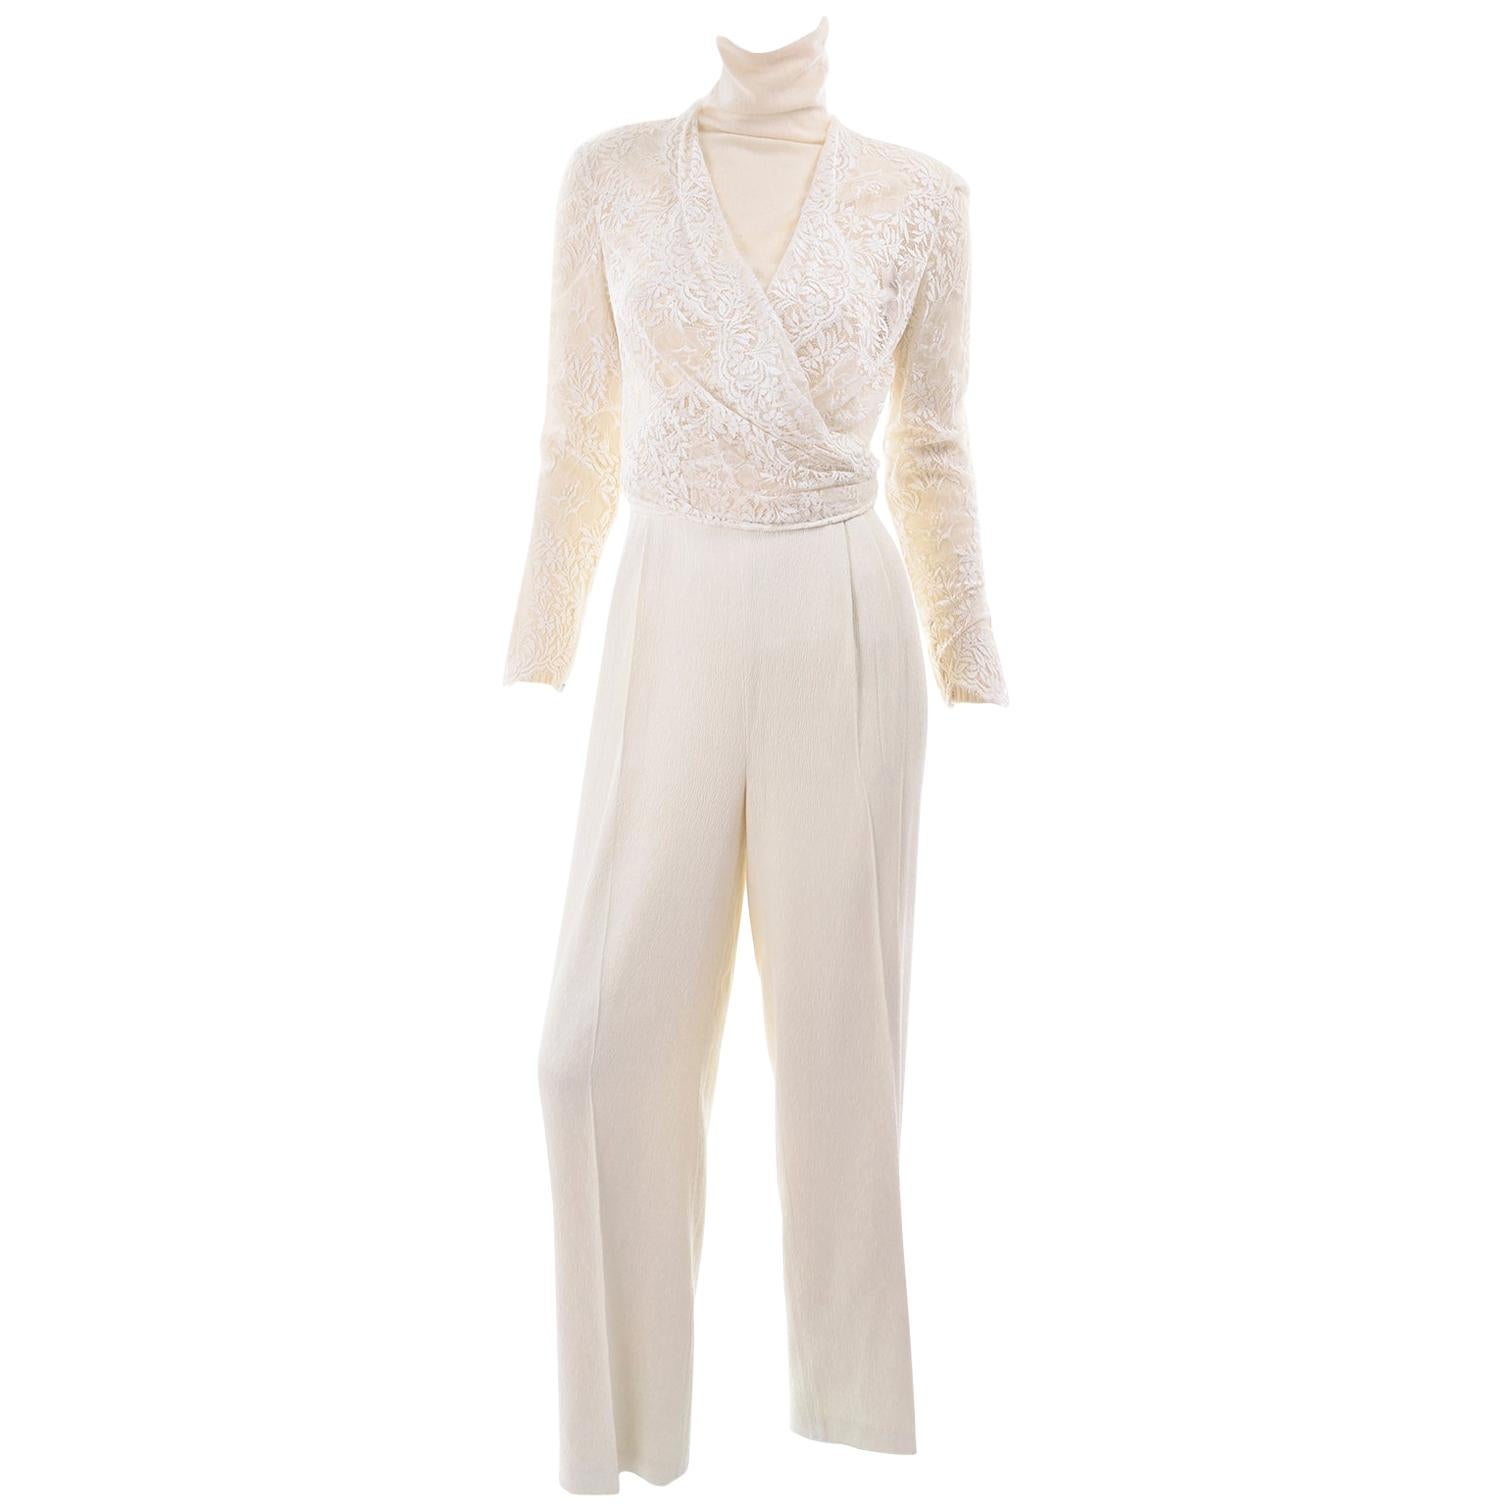 Valentino Cream Cashmere Sweater Ivory Lace Wrap Top & Textured High Waist Pants